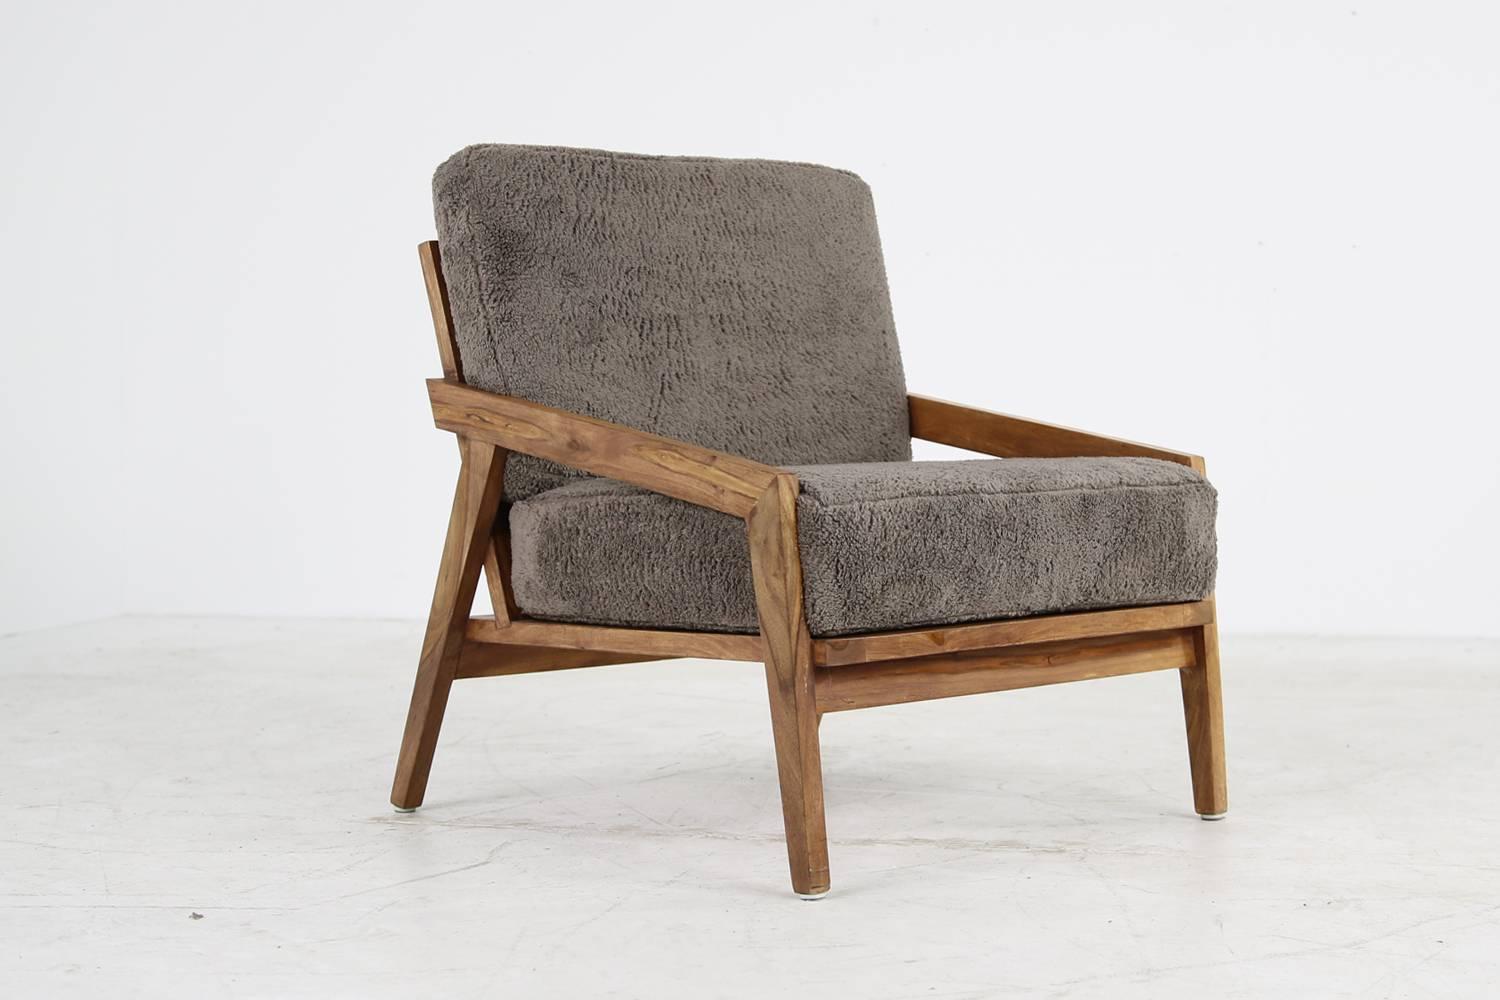 Beautiful unique Indonesian easy chair, made of solid wood, fantastic condition, oak or sheesham wood, cushions with new upholstery and covered with grey teddy fur fabric. 